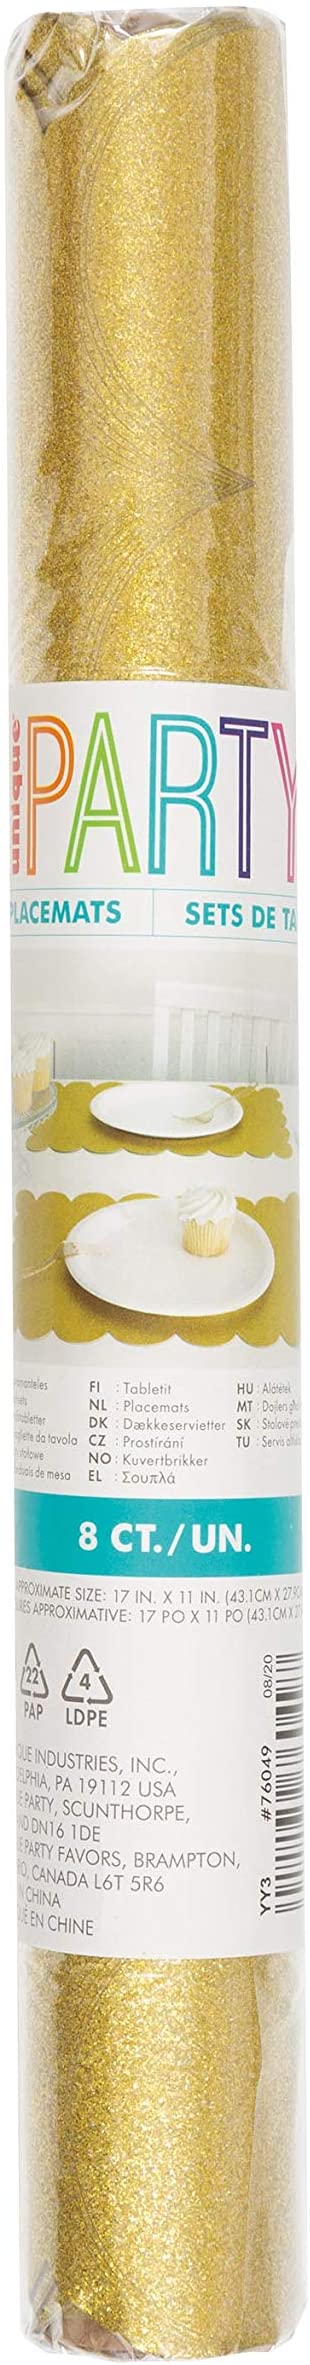 Plastic Glitter Gold Scalloped Placemats (8 Pcs) -1 Pack